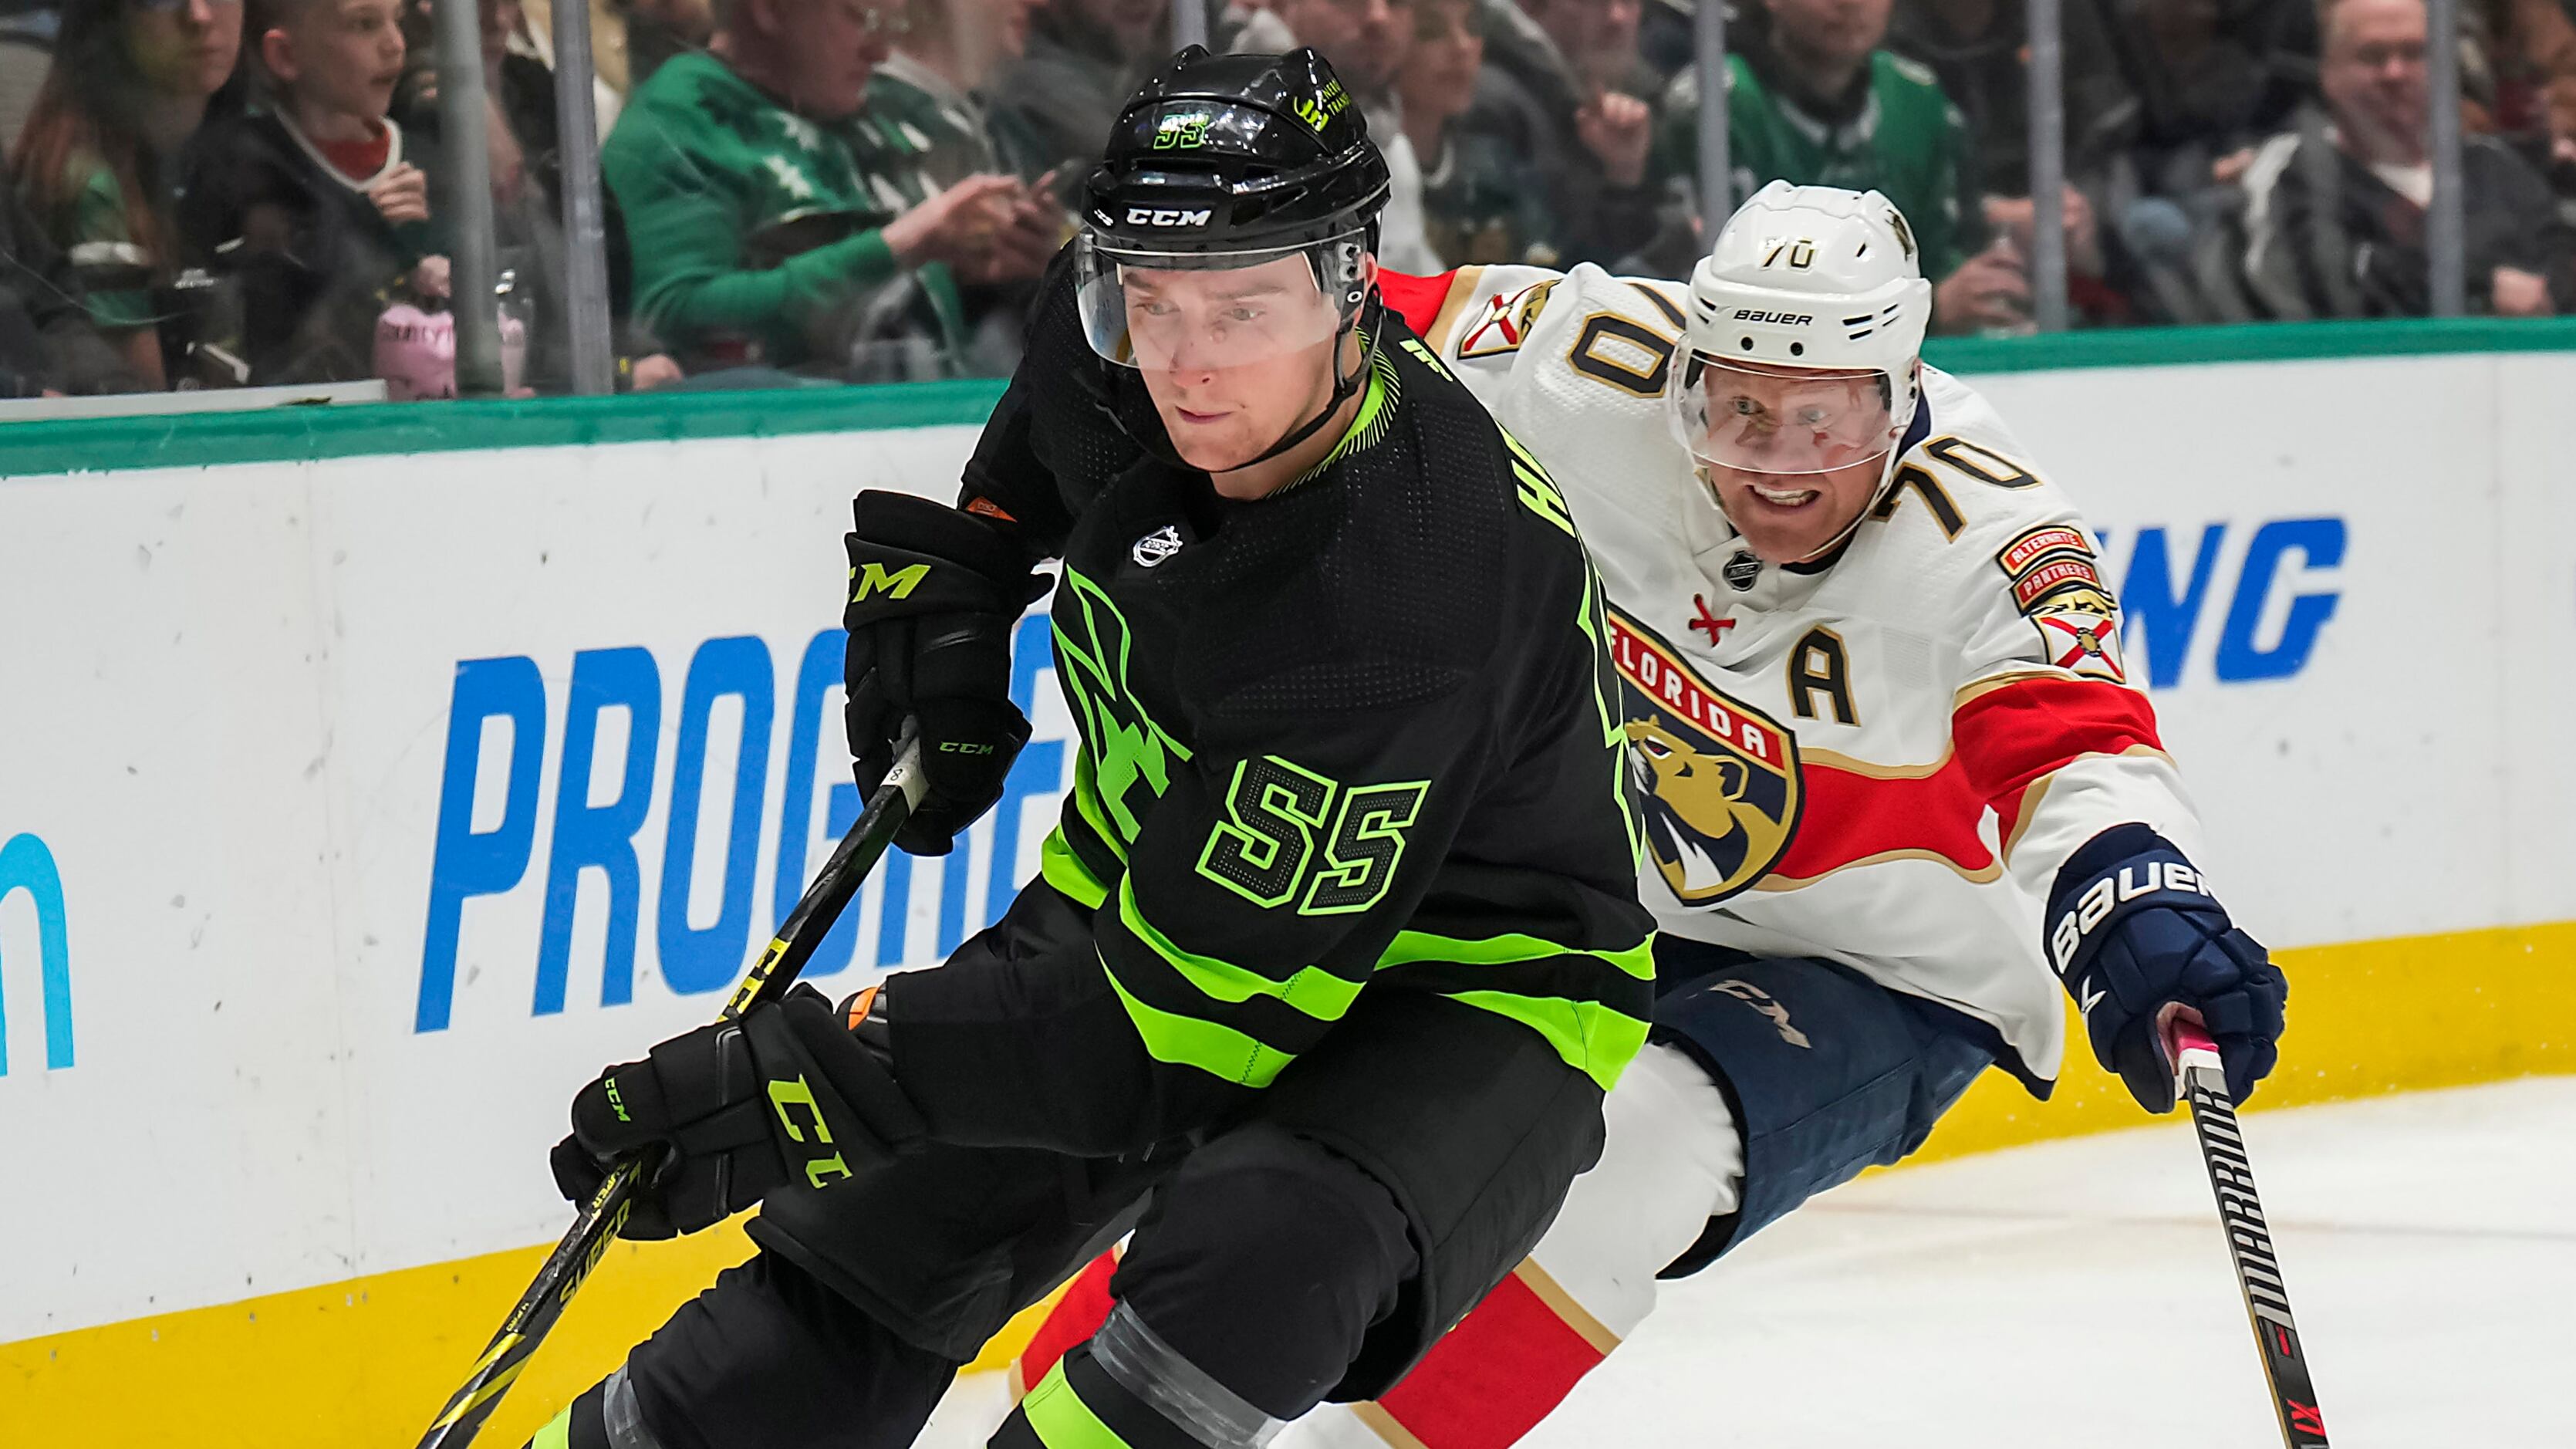 Miro's Moment  With Klingberg sidelined and the defense corps